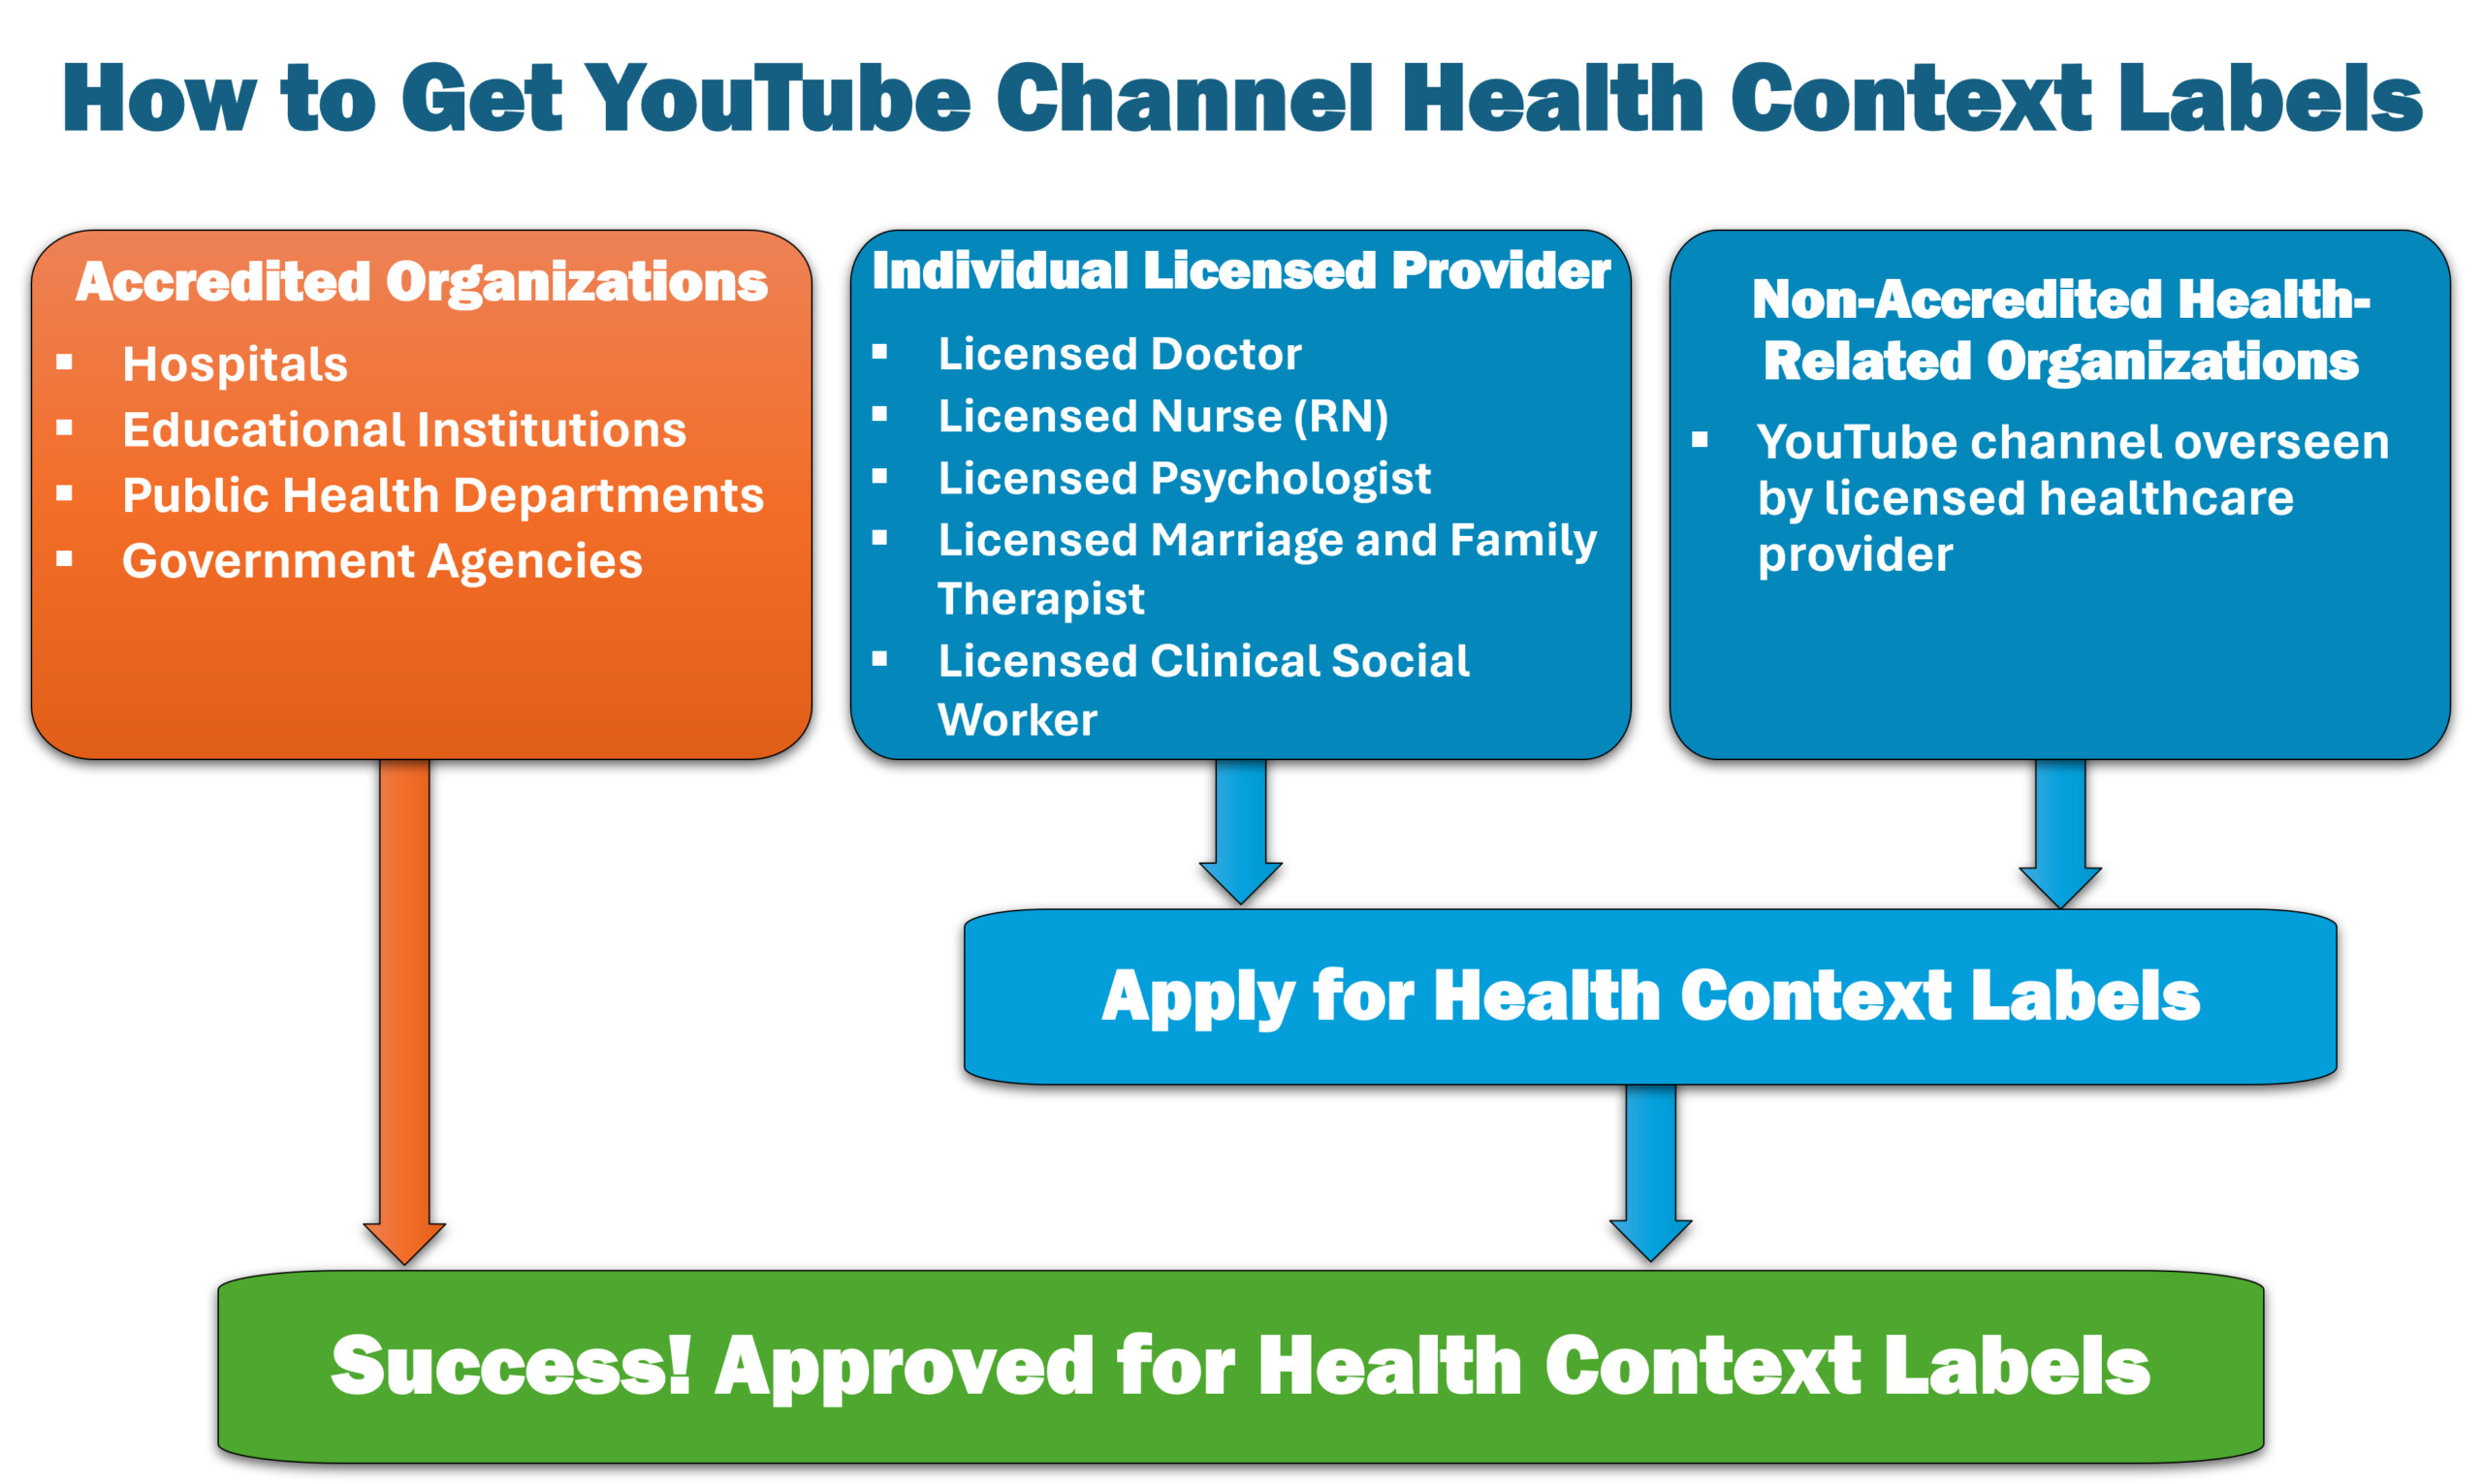 How to Get YouTube Channel Health Context Labels Flowchart